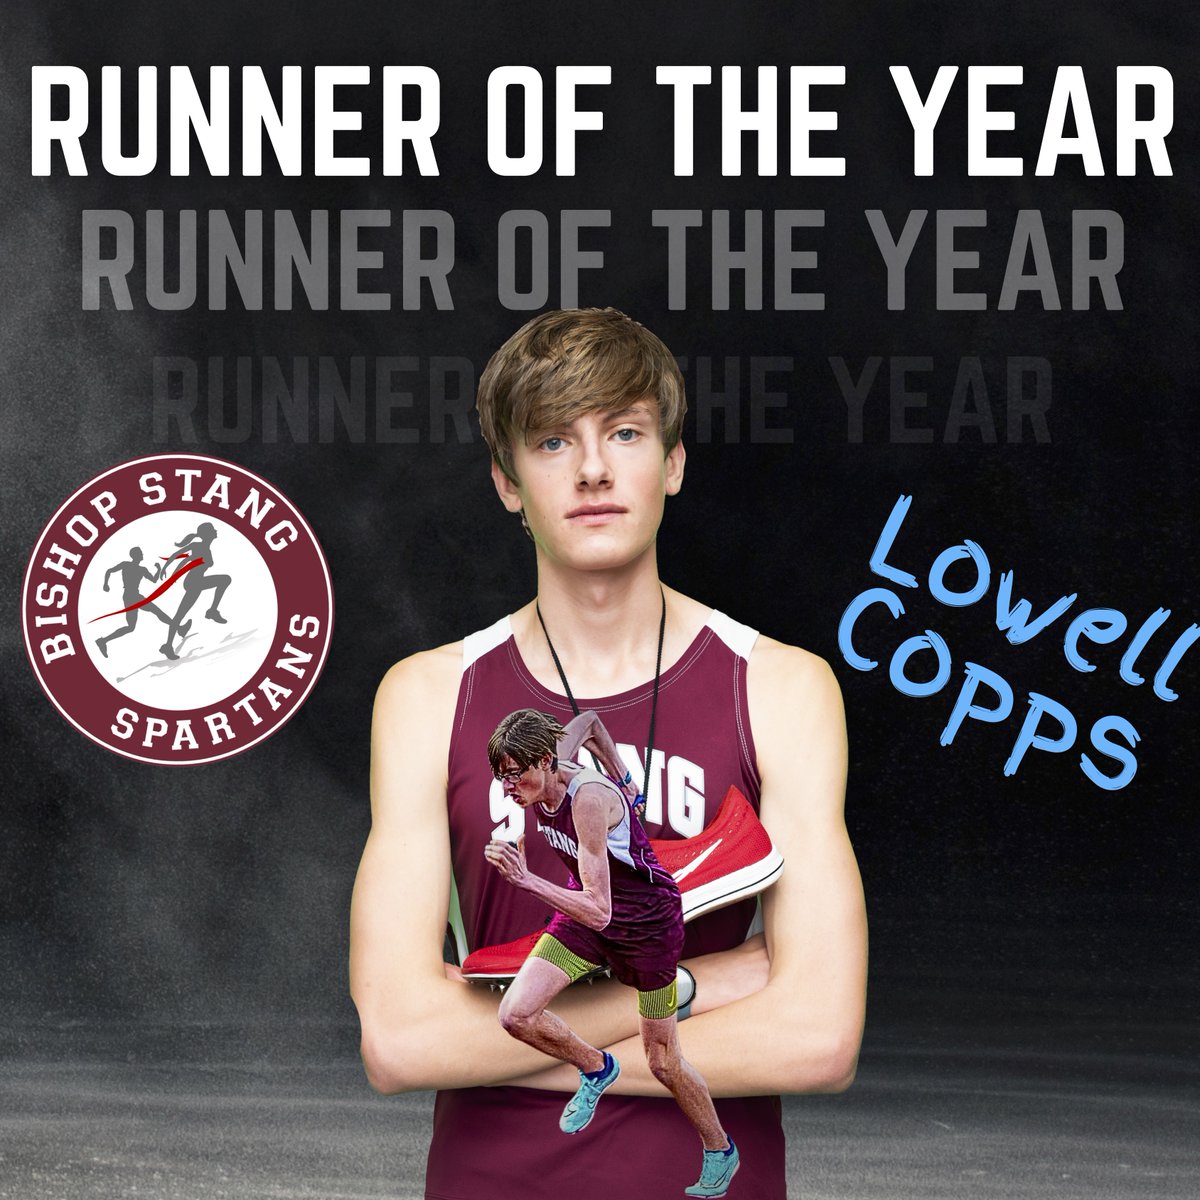 Congratulations to Jr. Lowell Copps on being named the Standard Times Runner of the Year for Cross Country! 'Copps had his best performances on the biggest stages.' Congratulations Lowell, on an incredible season. We can't wait to see what you accomplish next year! @SC_Varsity